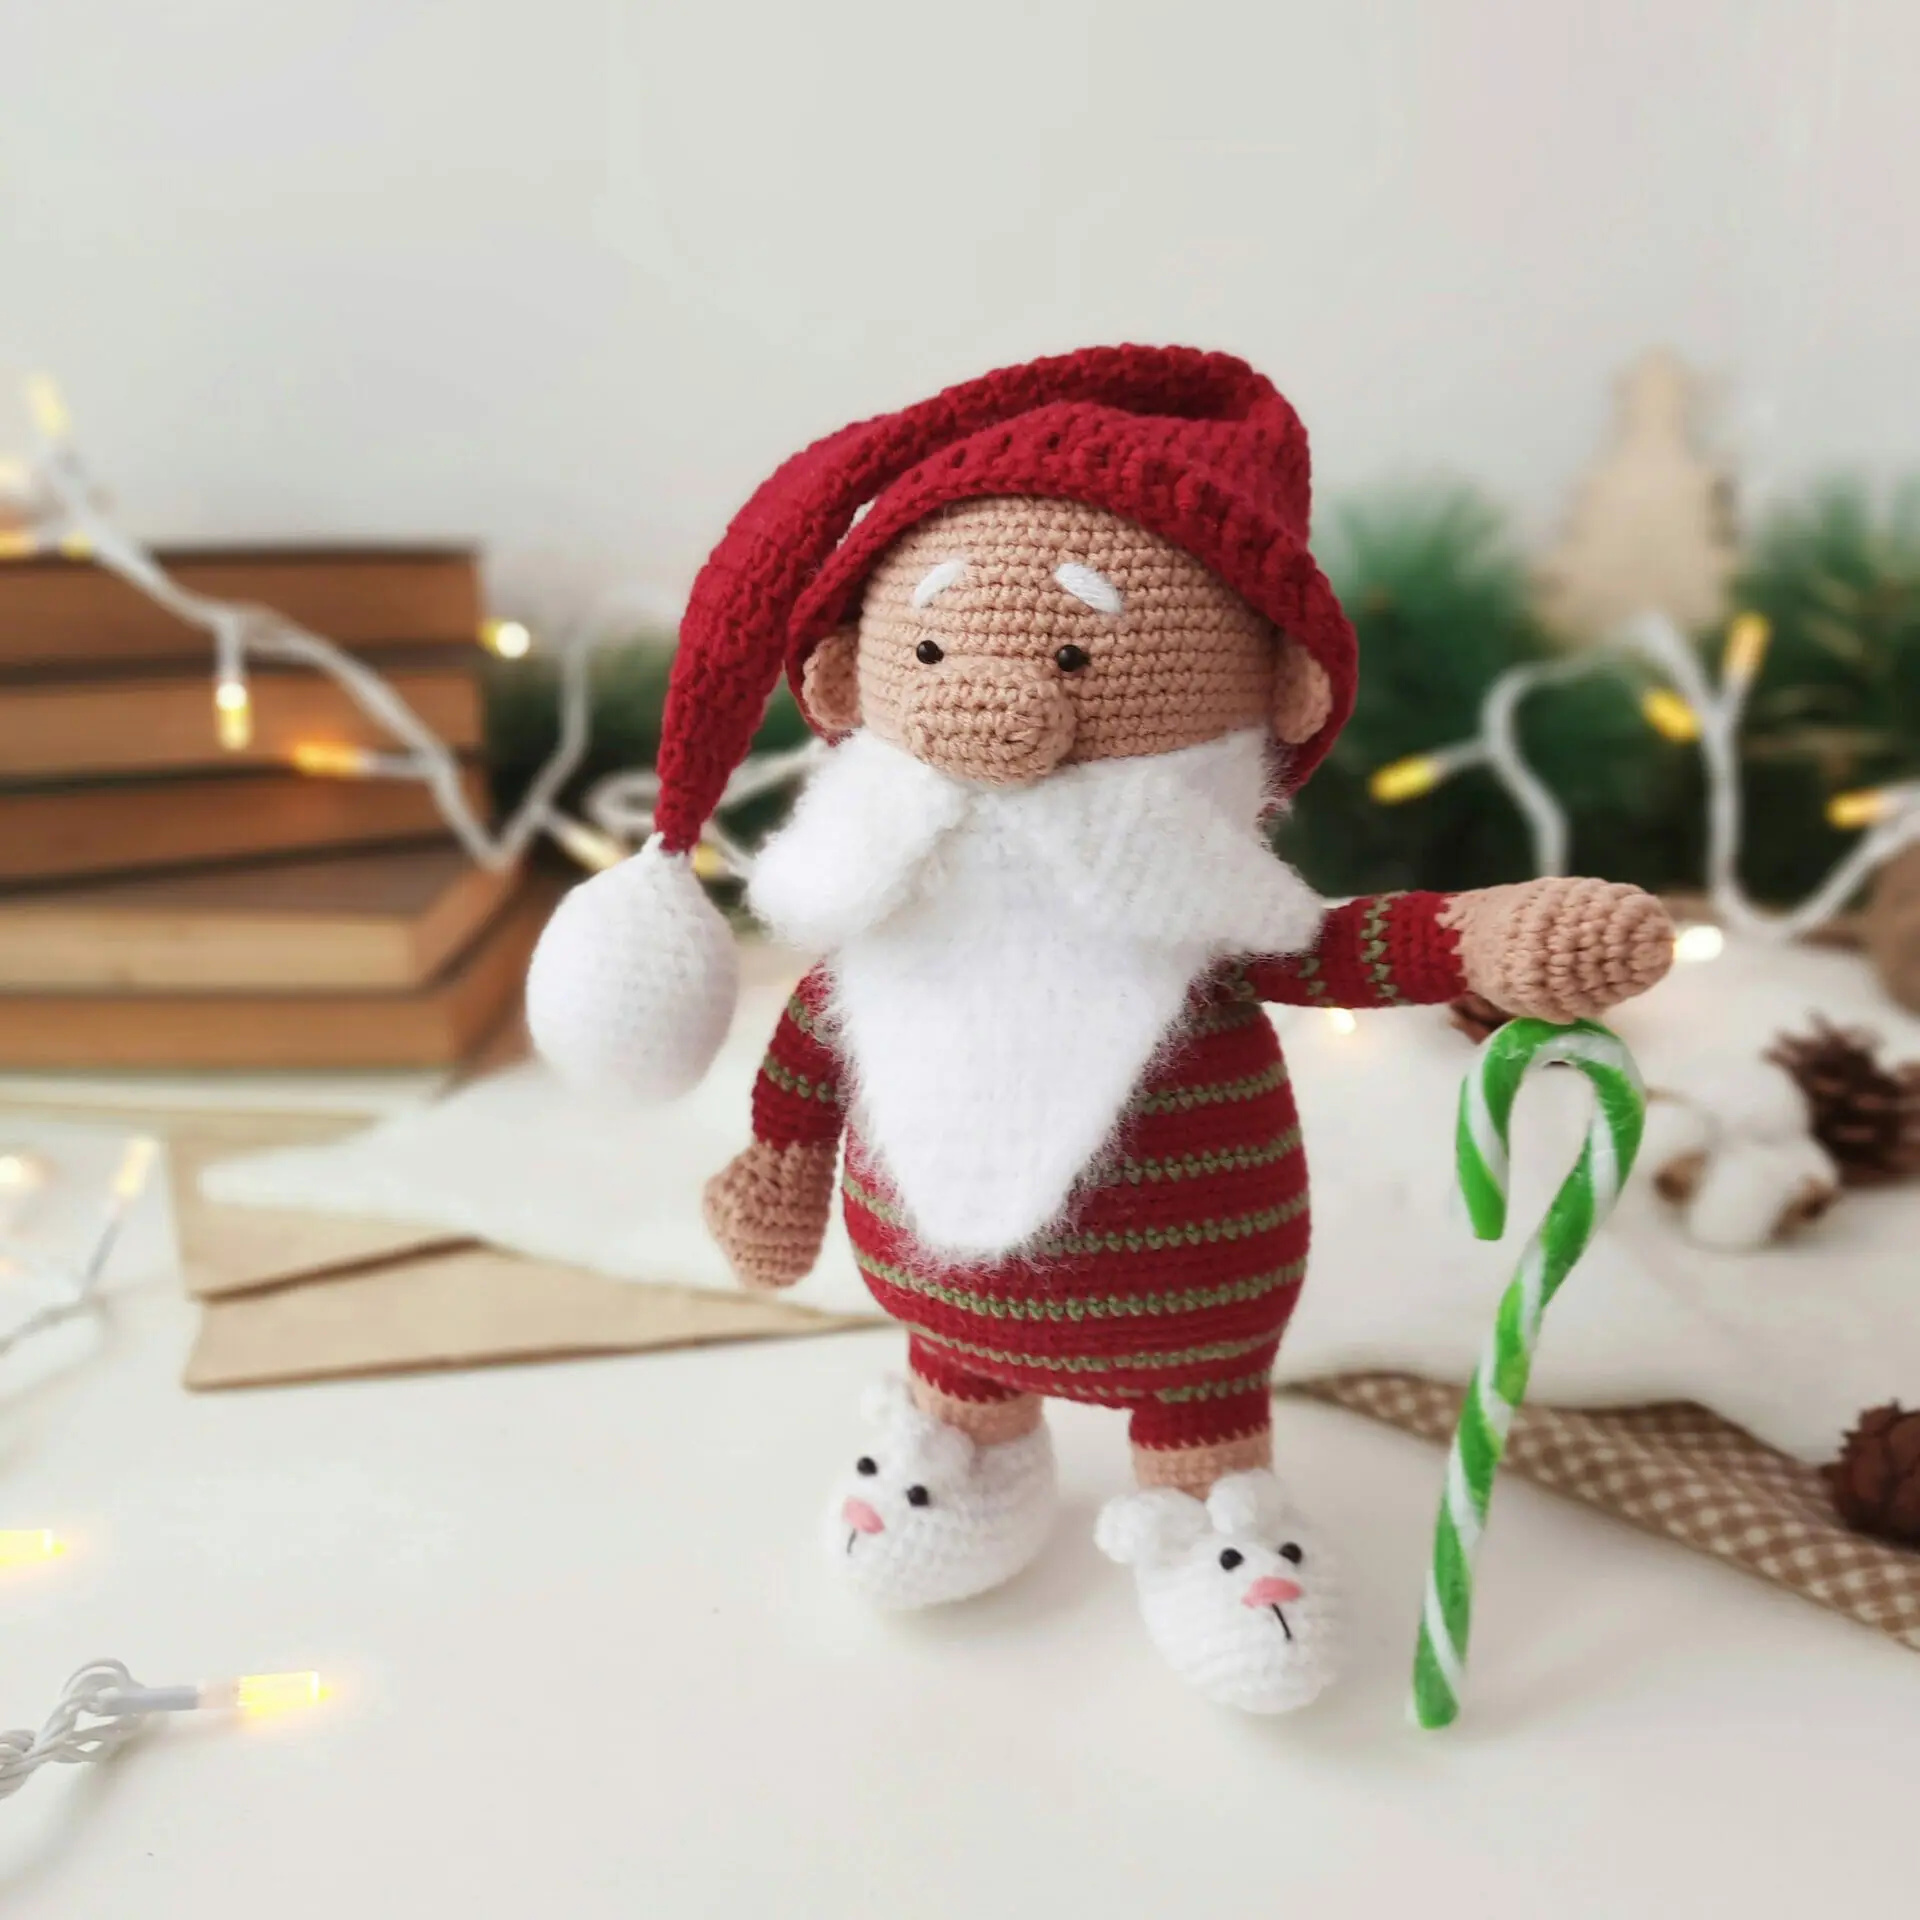 Santa Claus in home clothes cozy Christmas gift